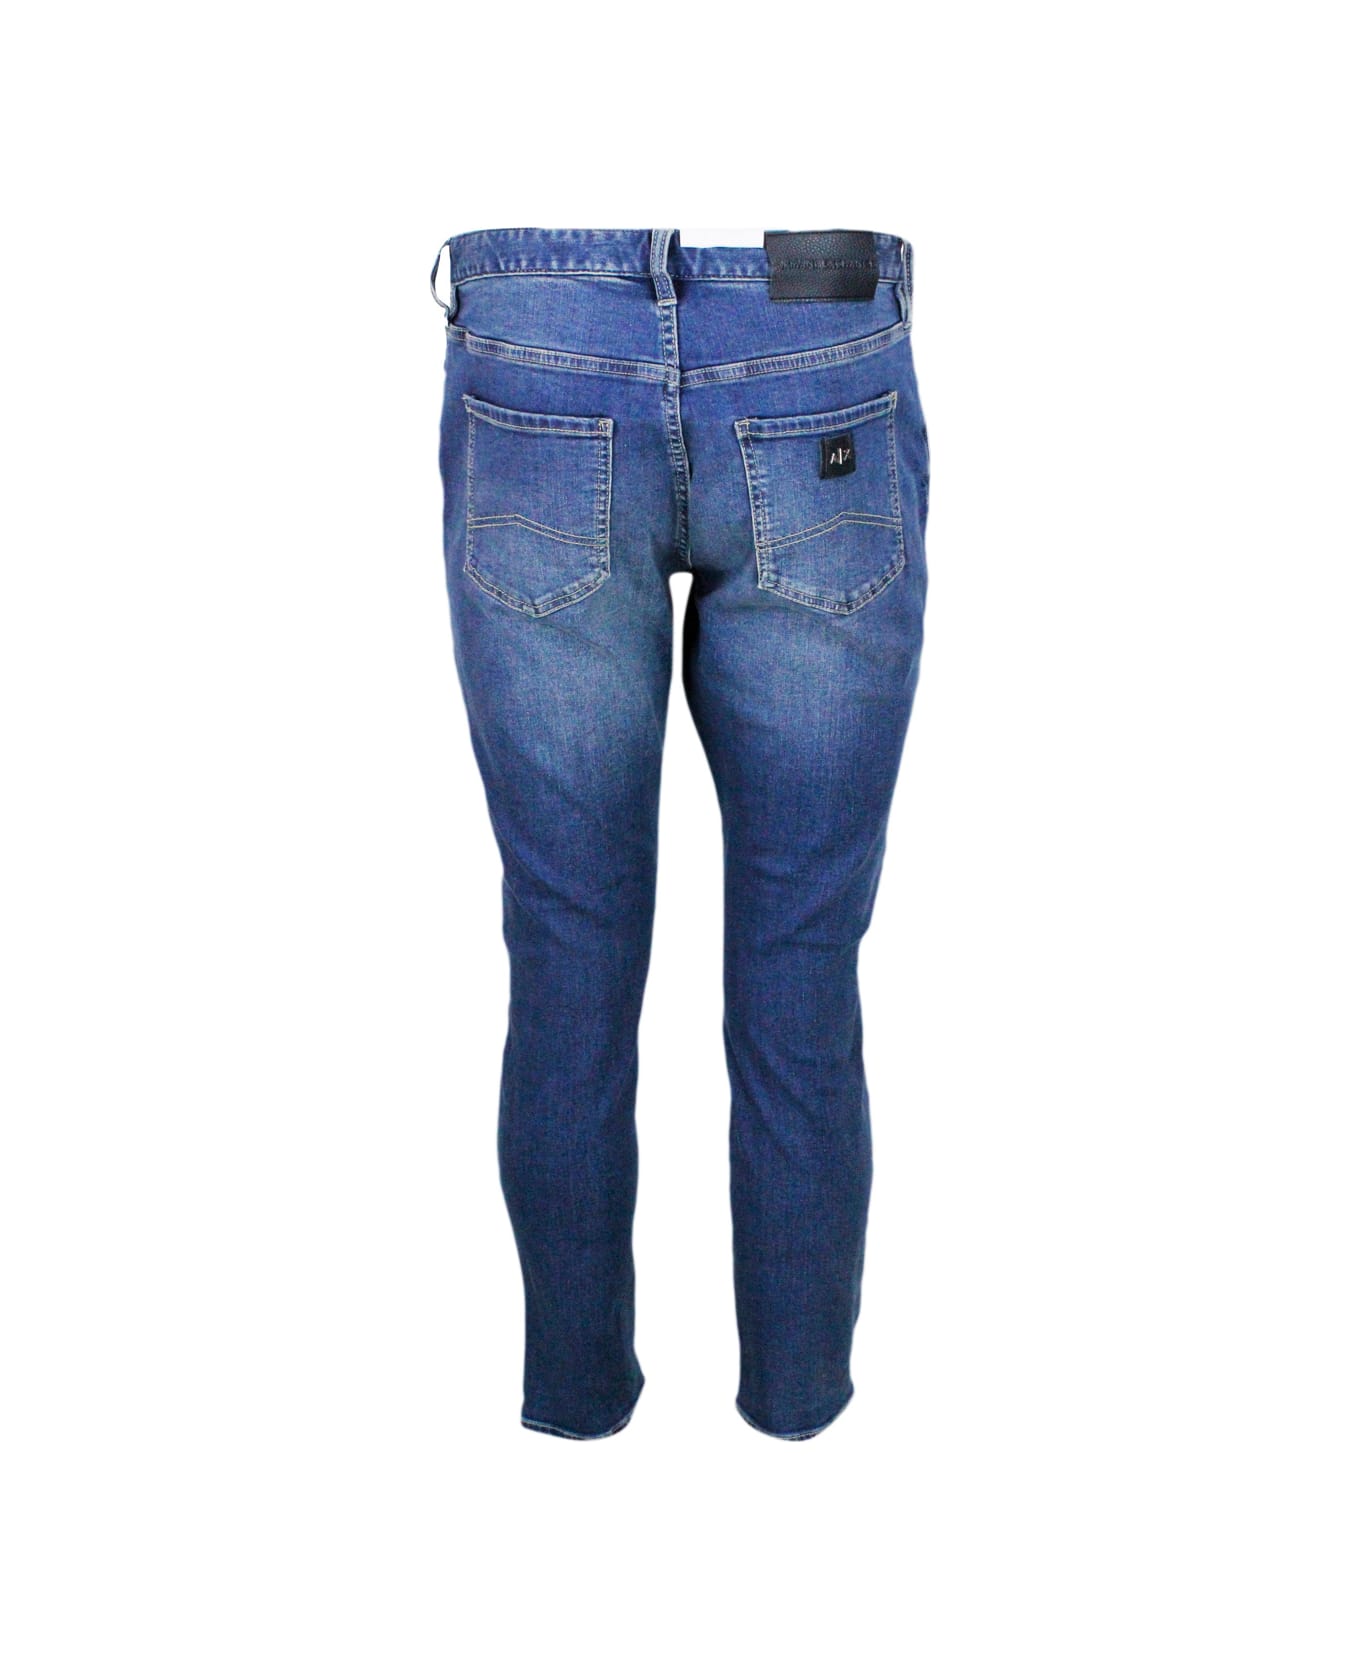 Armani Collezioni Skinny Jeans In Soft Stretch Denim With Contrasting Stitching And Leather Tab. Zip And Button Closure - Denim